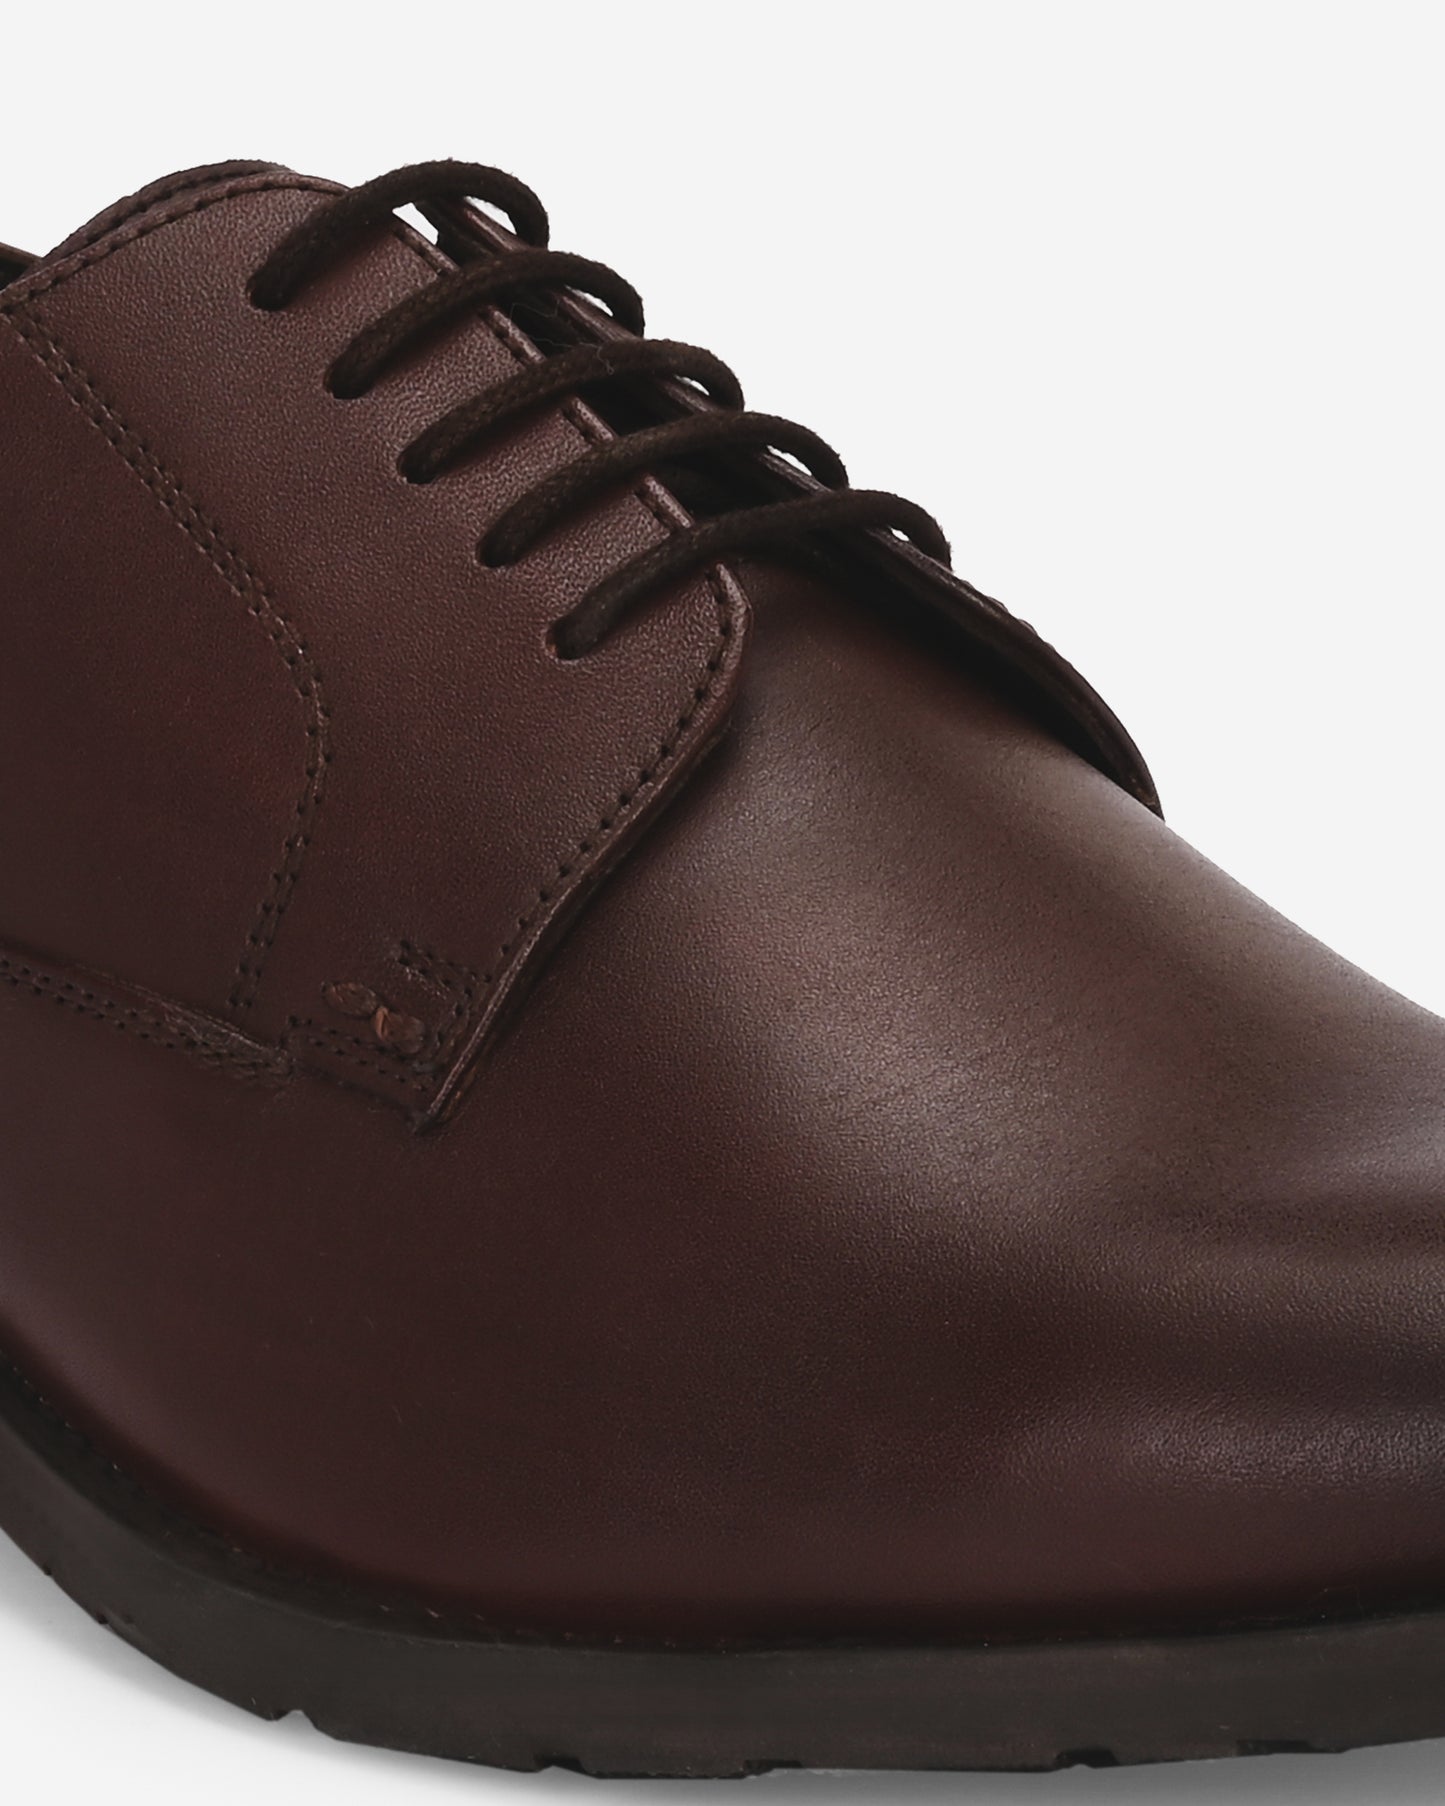 JACOB DARK BROWN LACE UP SHOES